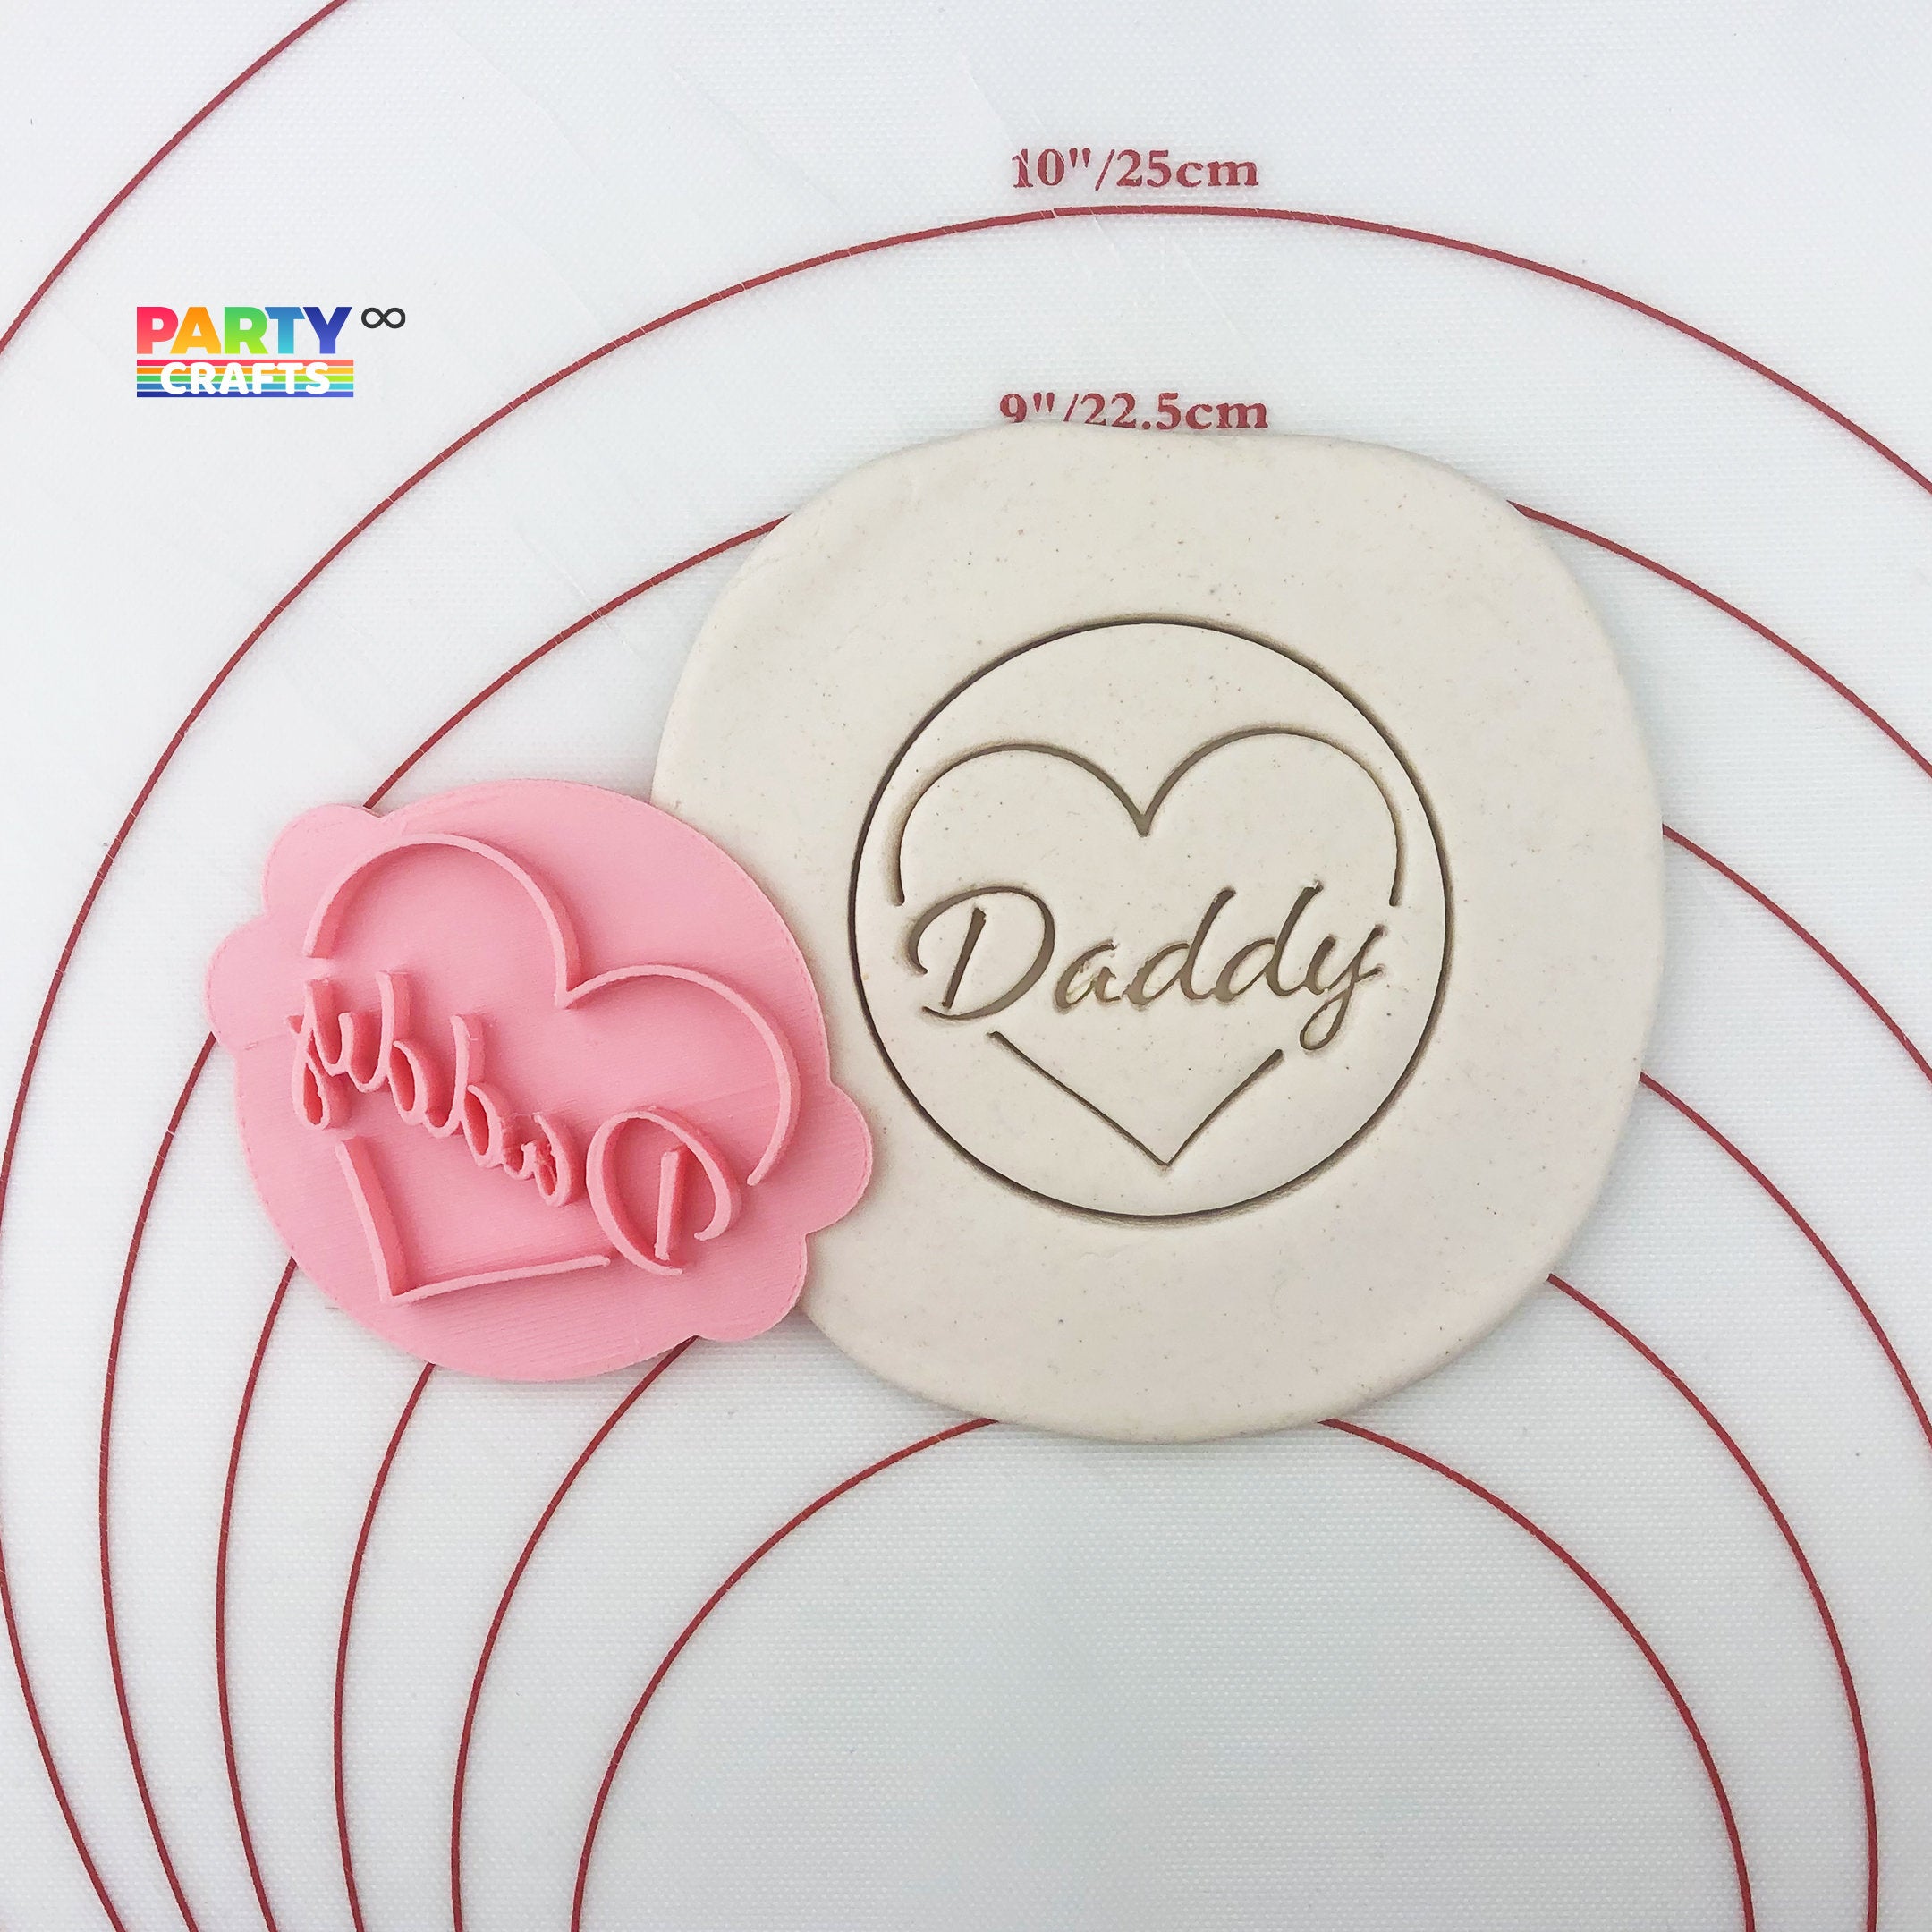 Daddy cookie stamp